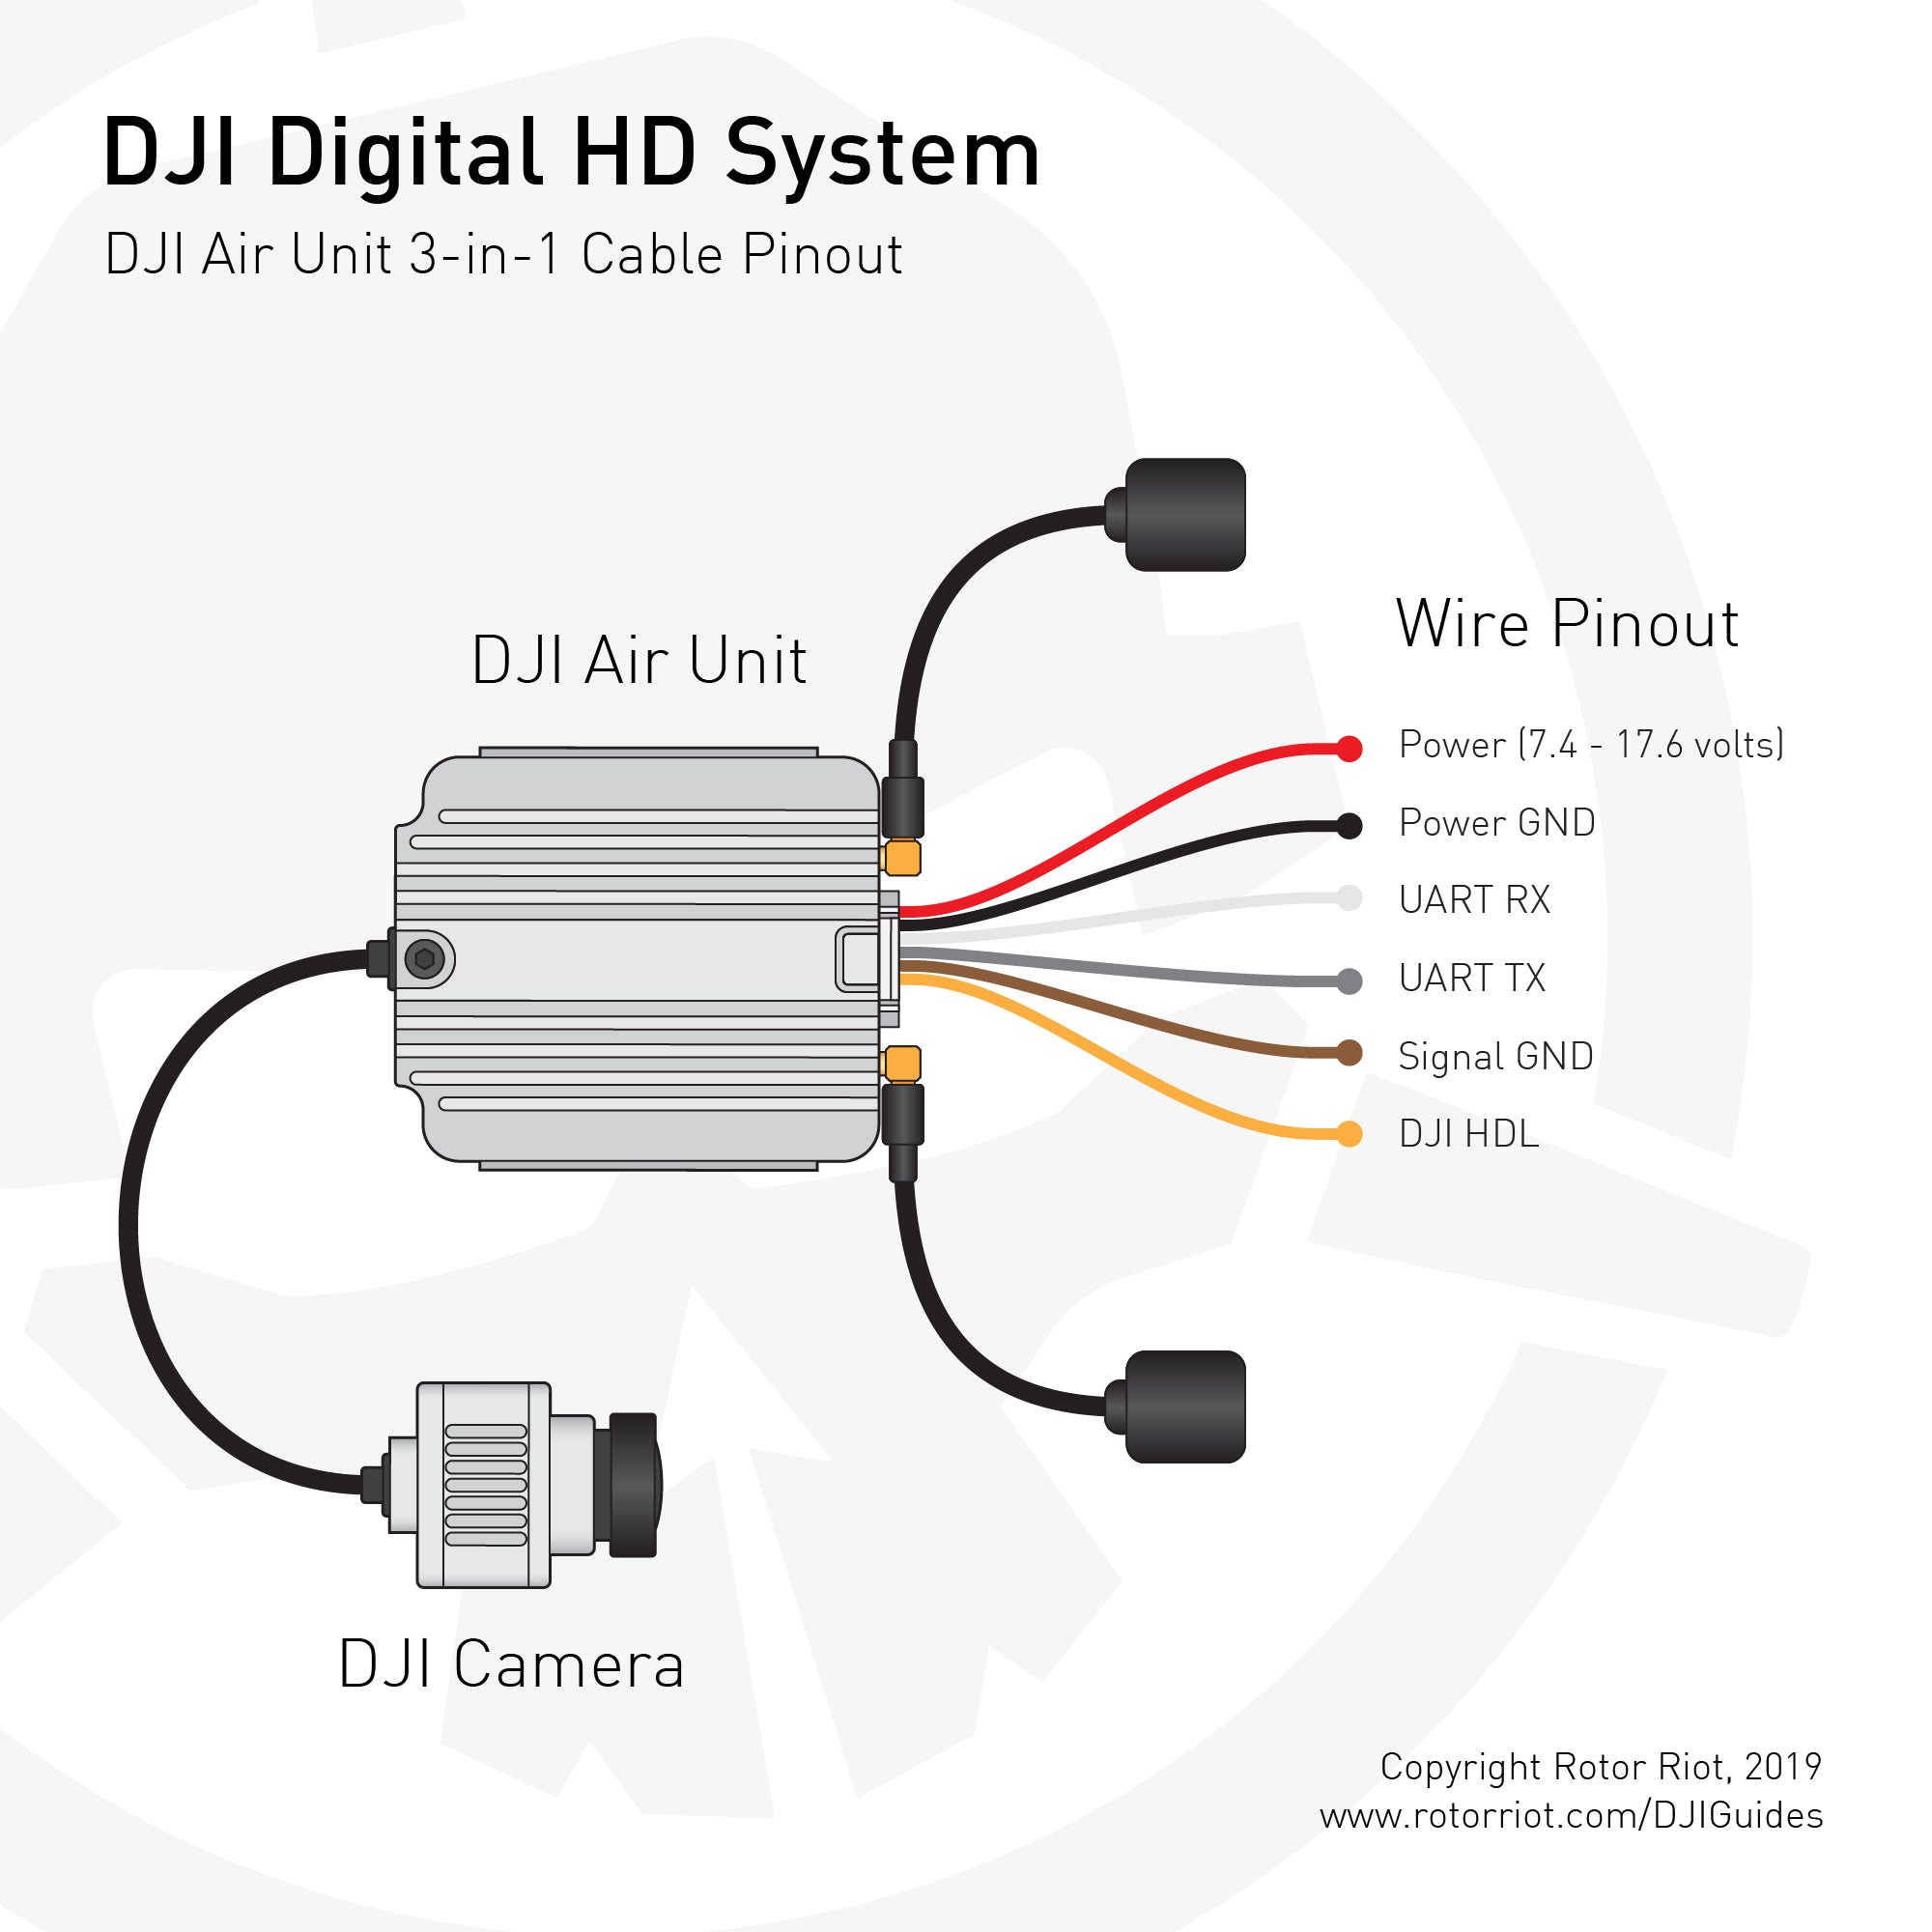 DJI Air Unit Pinout Wiring Diagram 3-in-1 Cable Connections